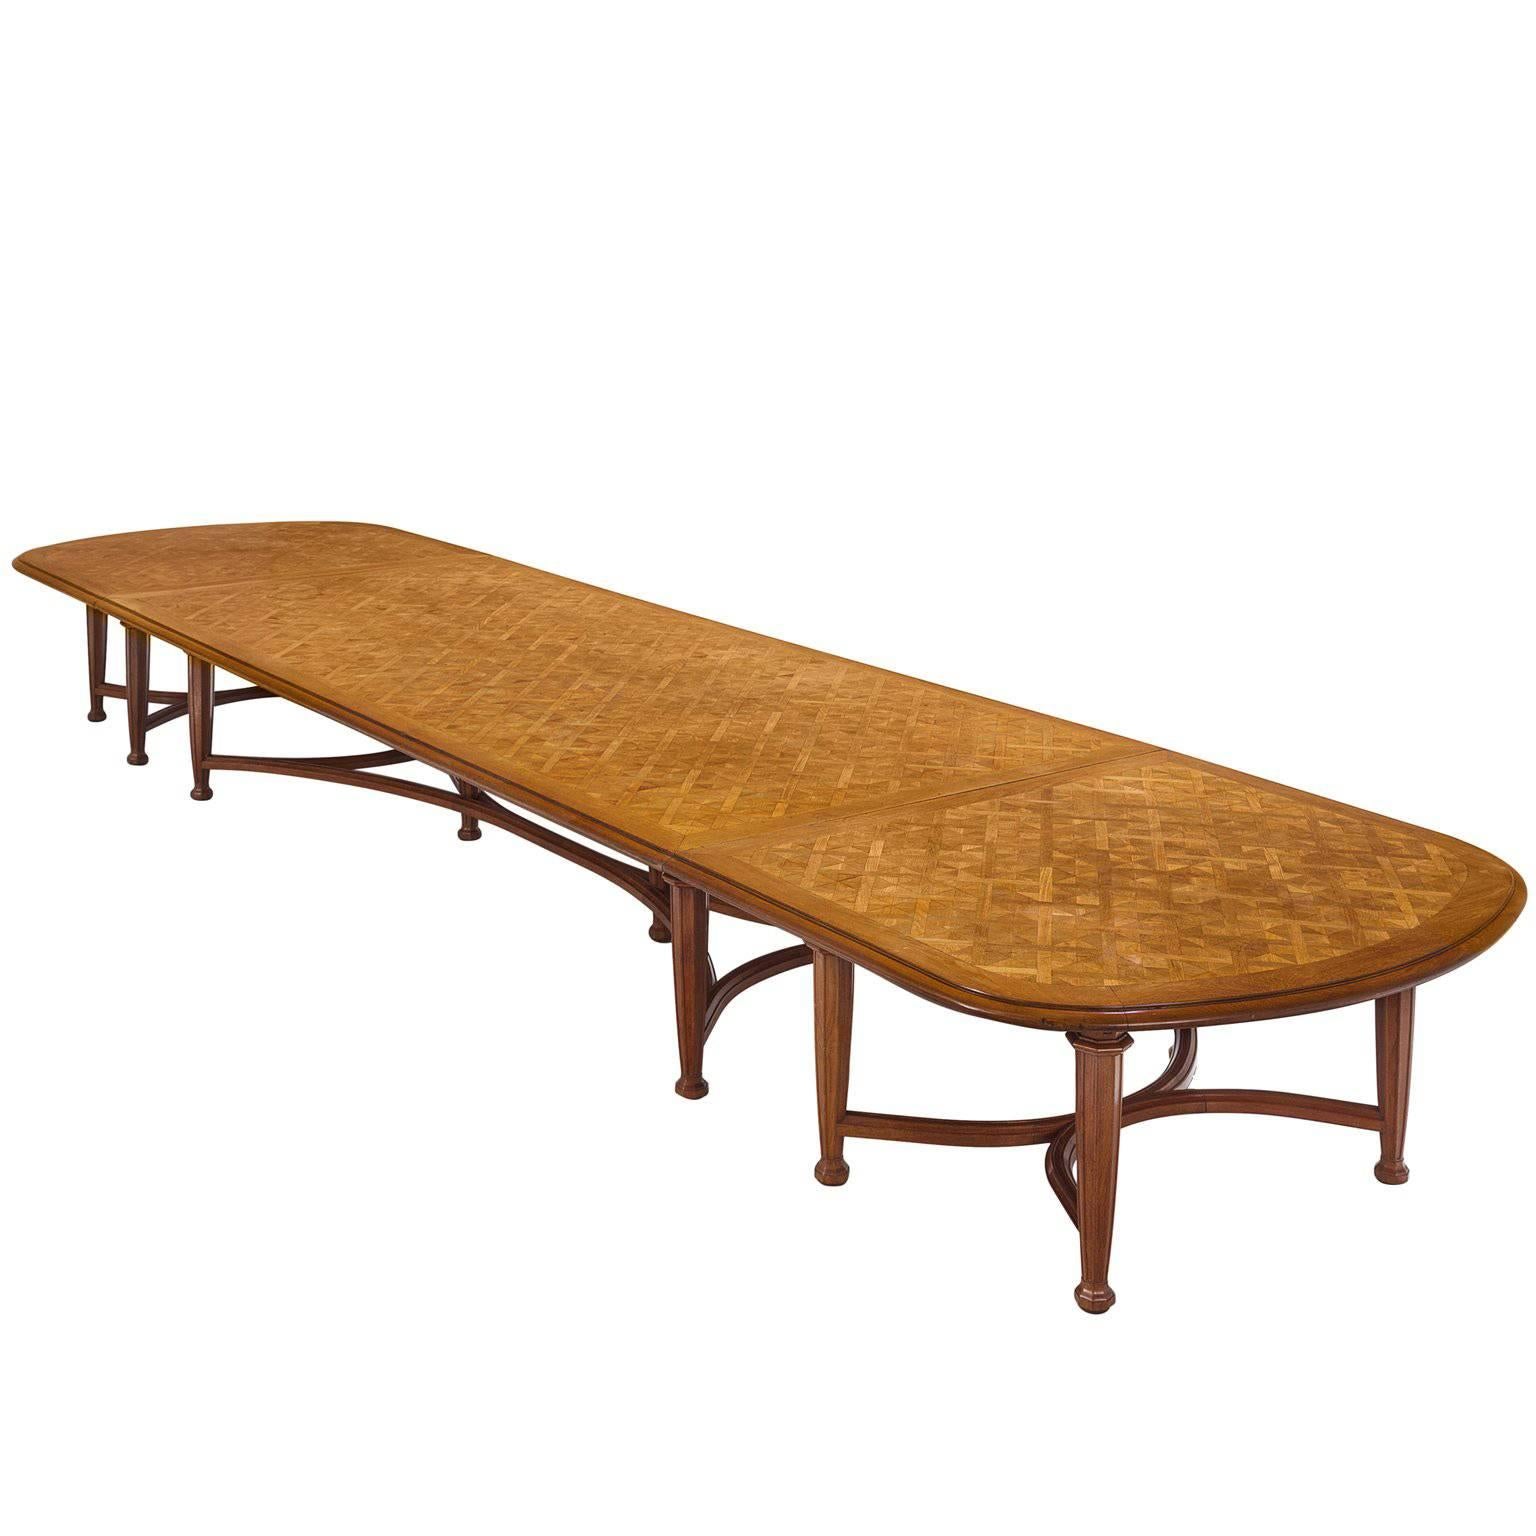 Extra Large 675cm/265in Oak Conference Table, c. 1925